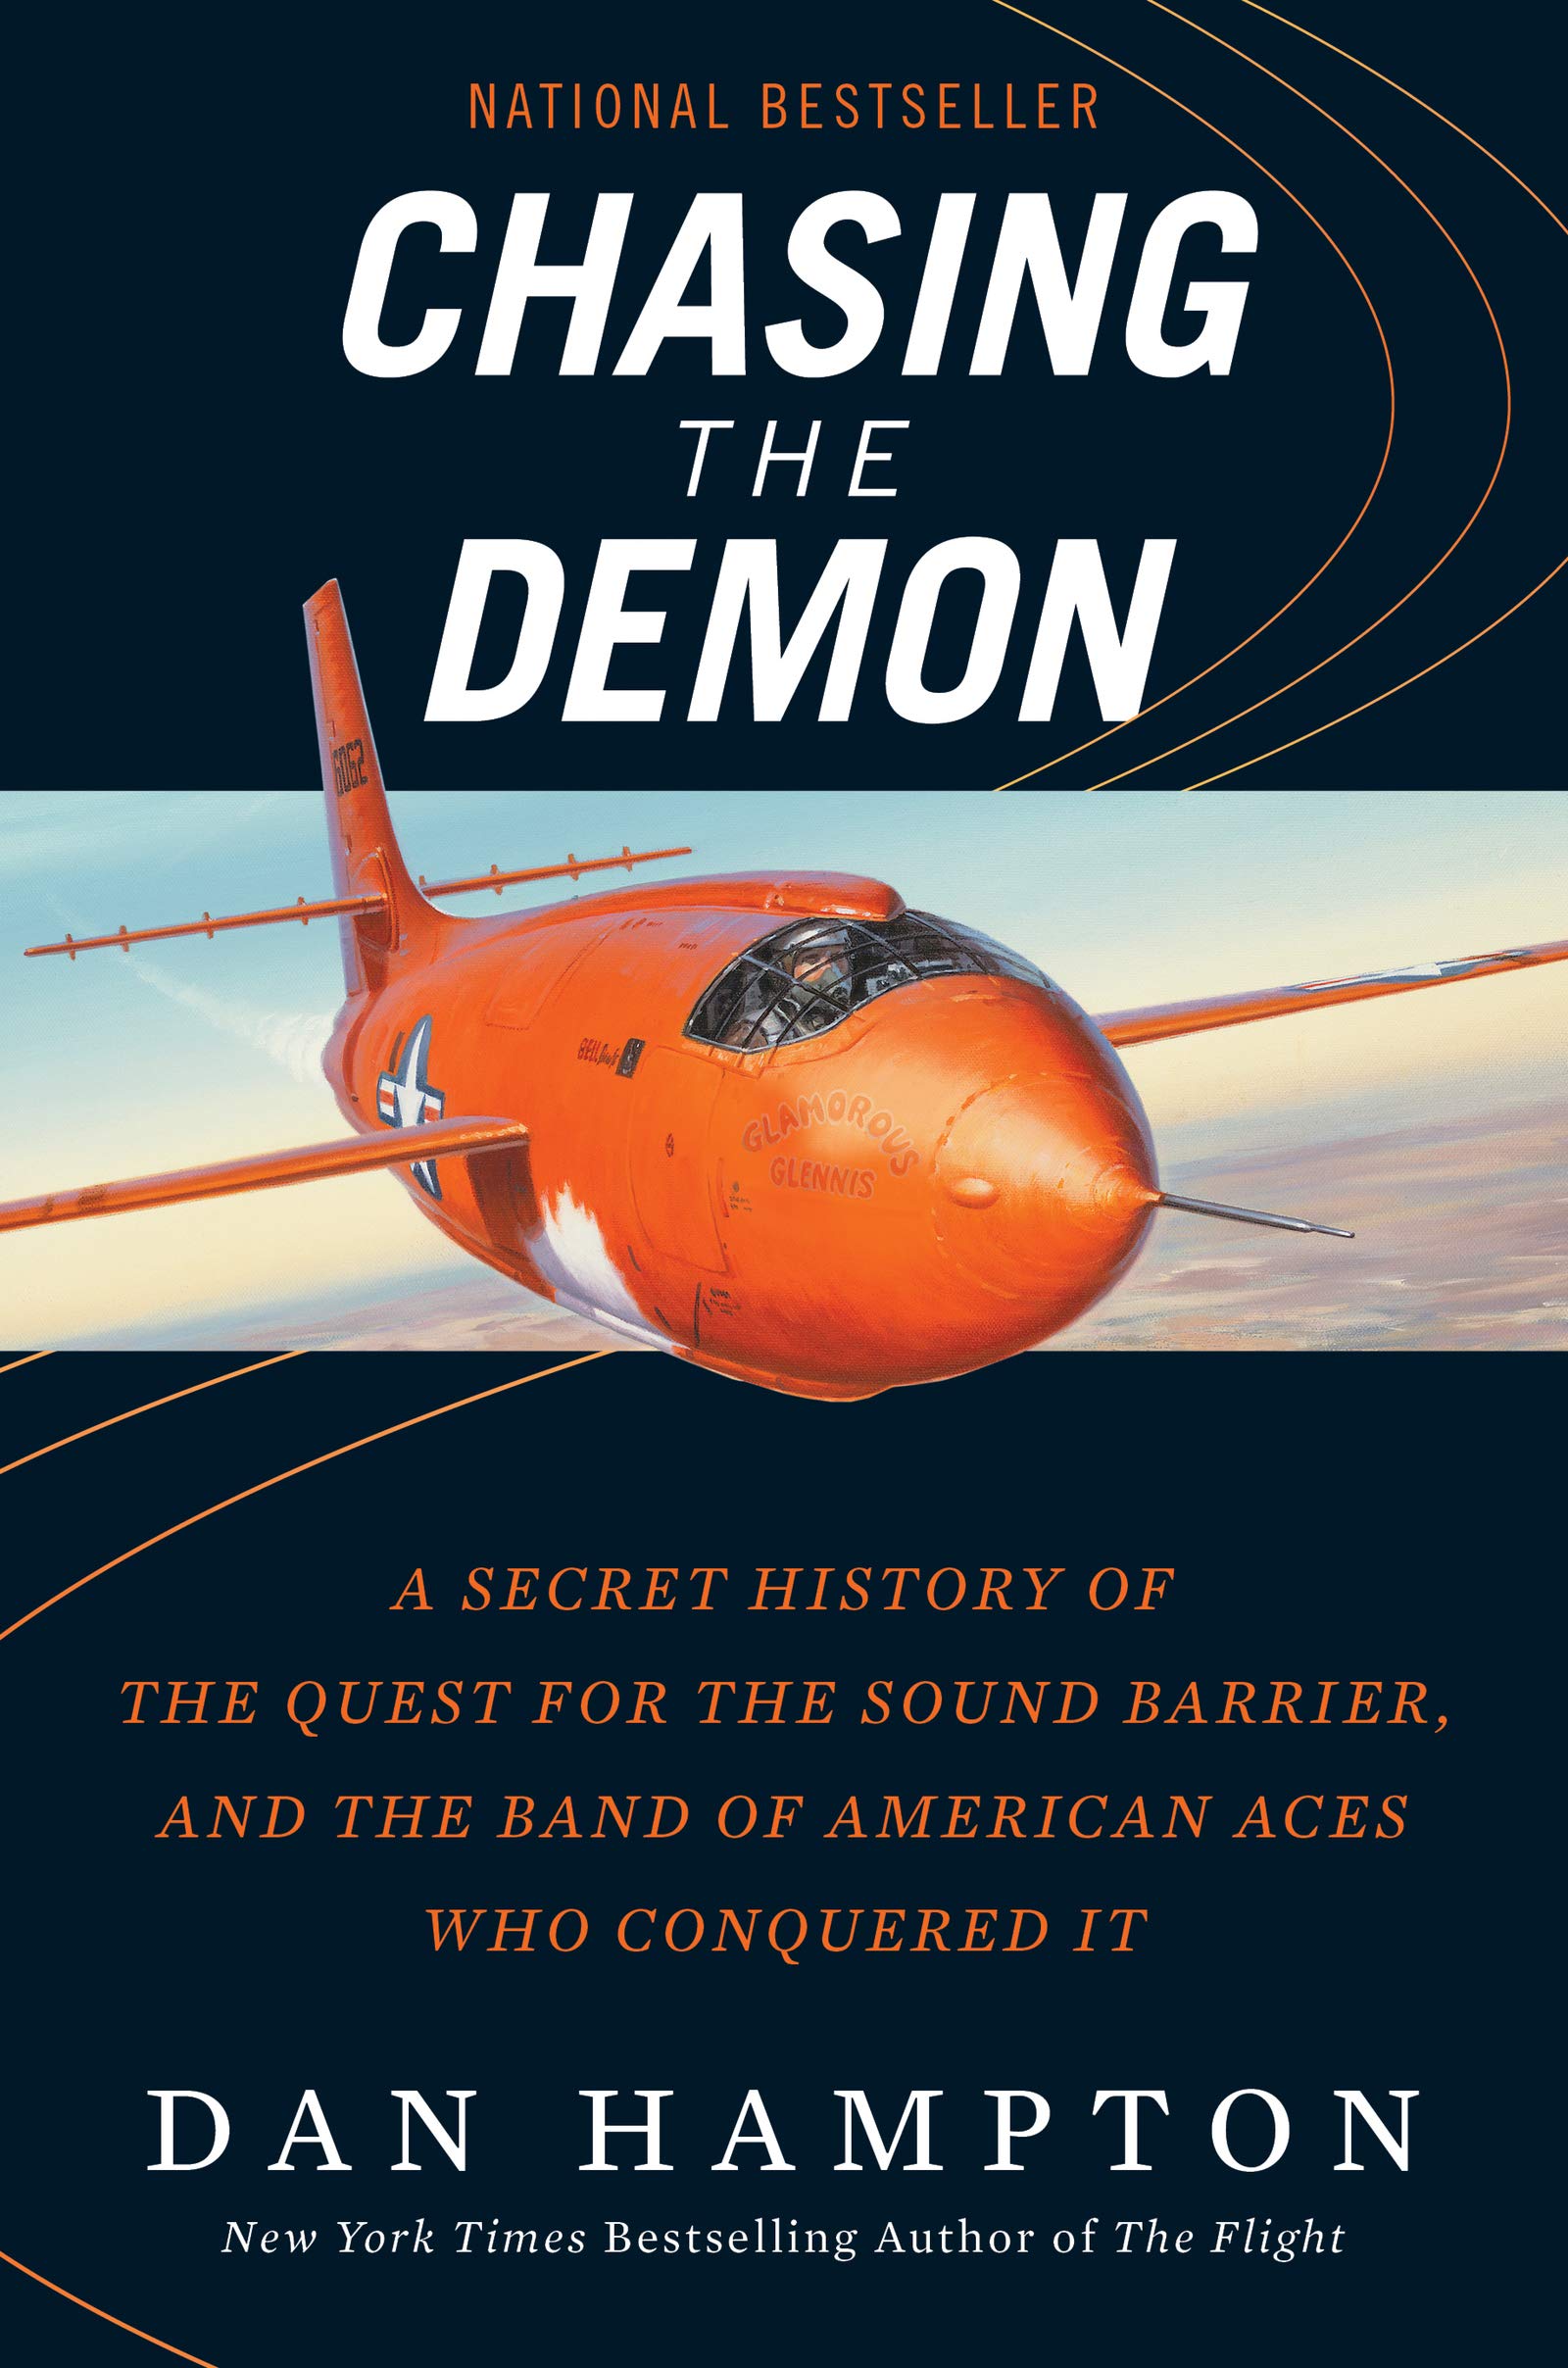 Chasing the Demon: A Secret History of the Quest for the Sound Barrier, and the Band of American Aces Who Conquered It